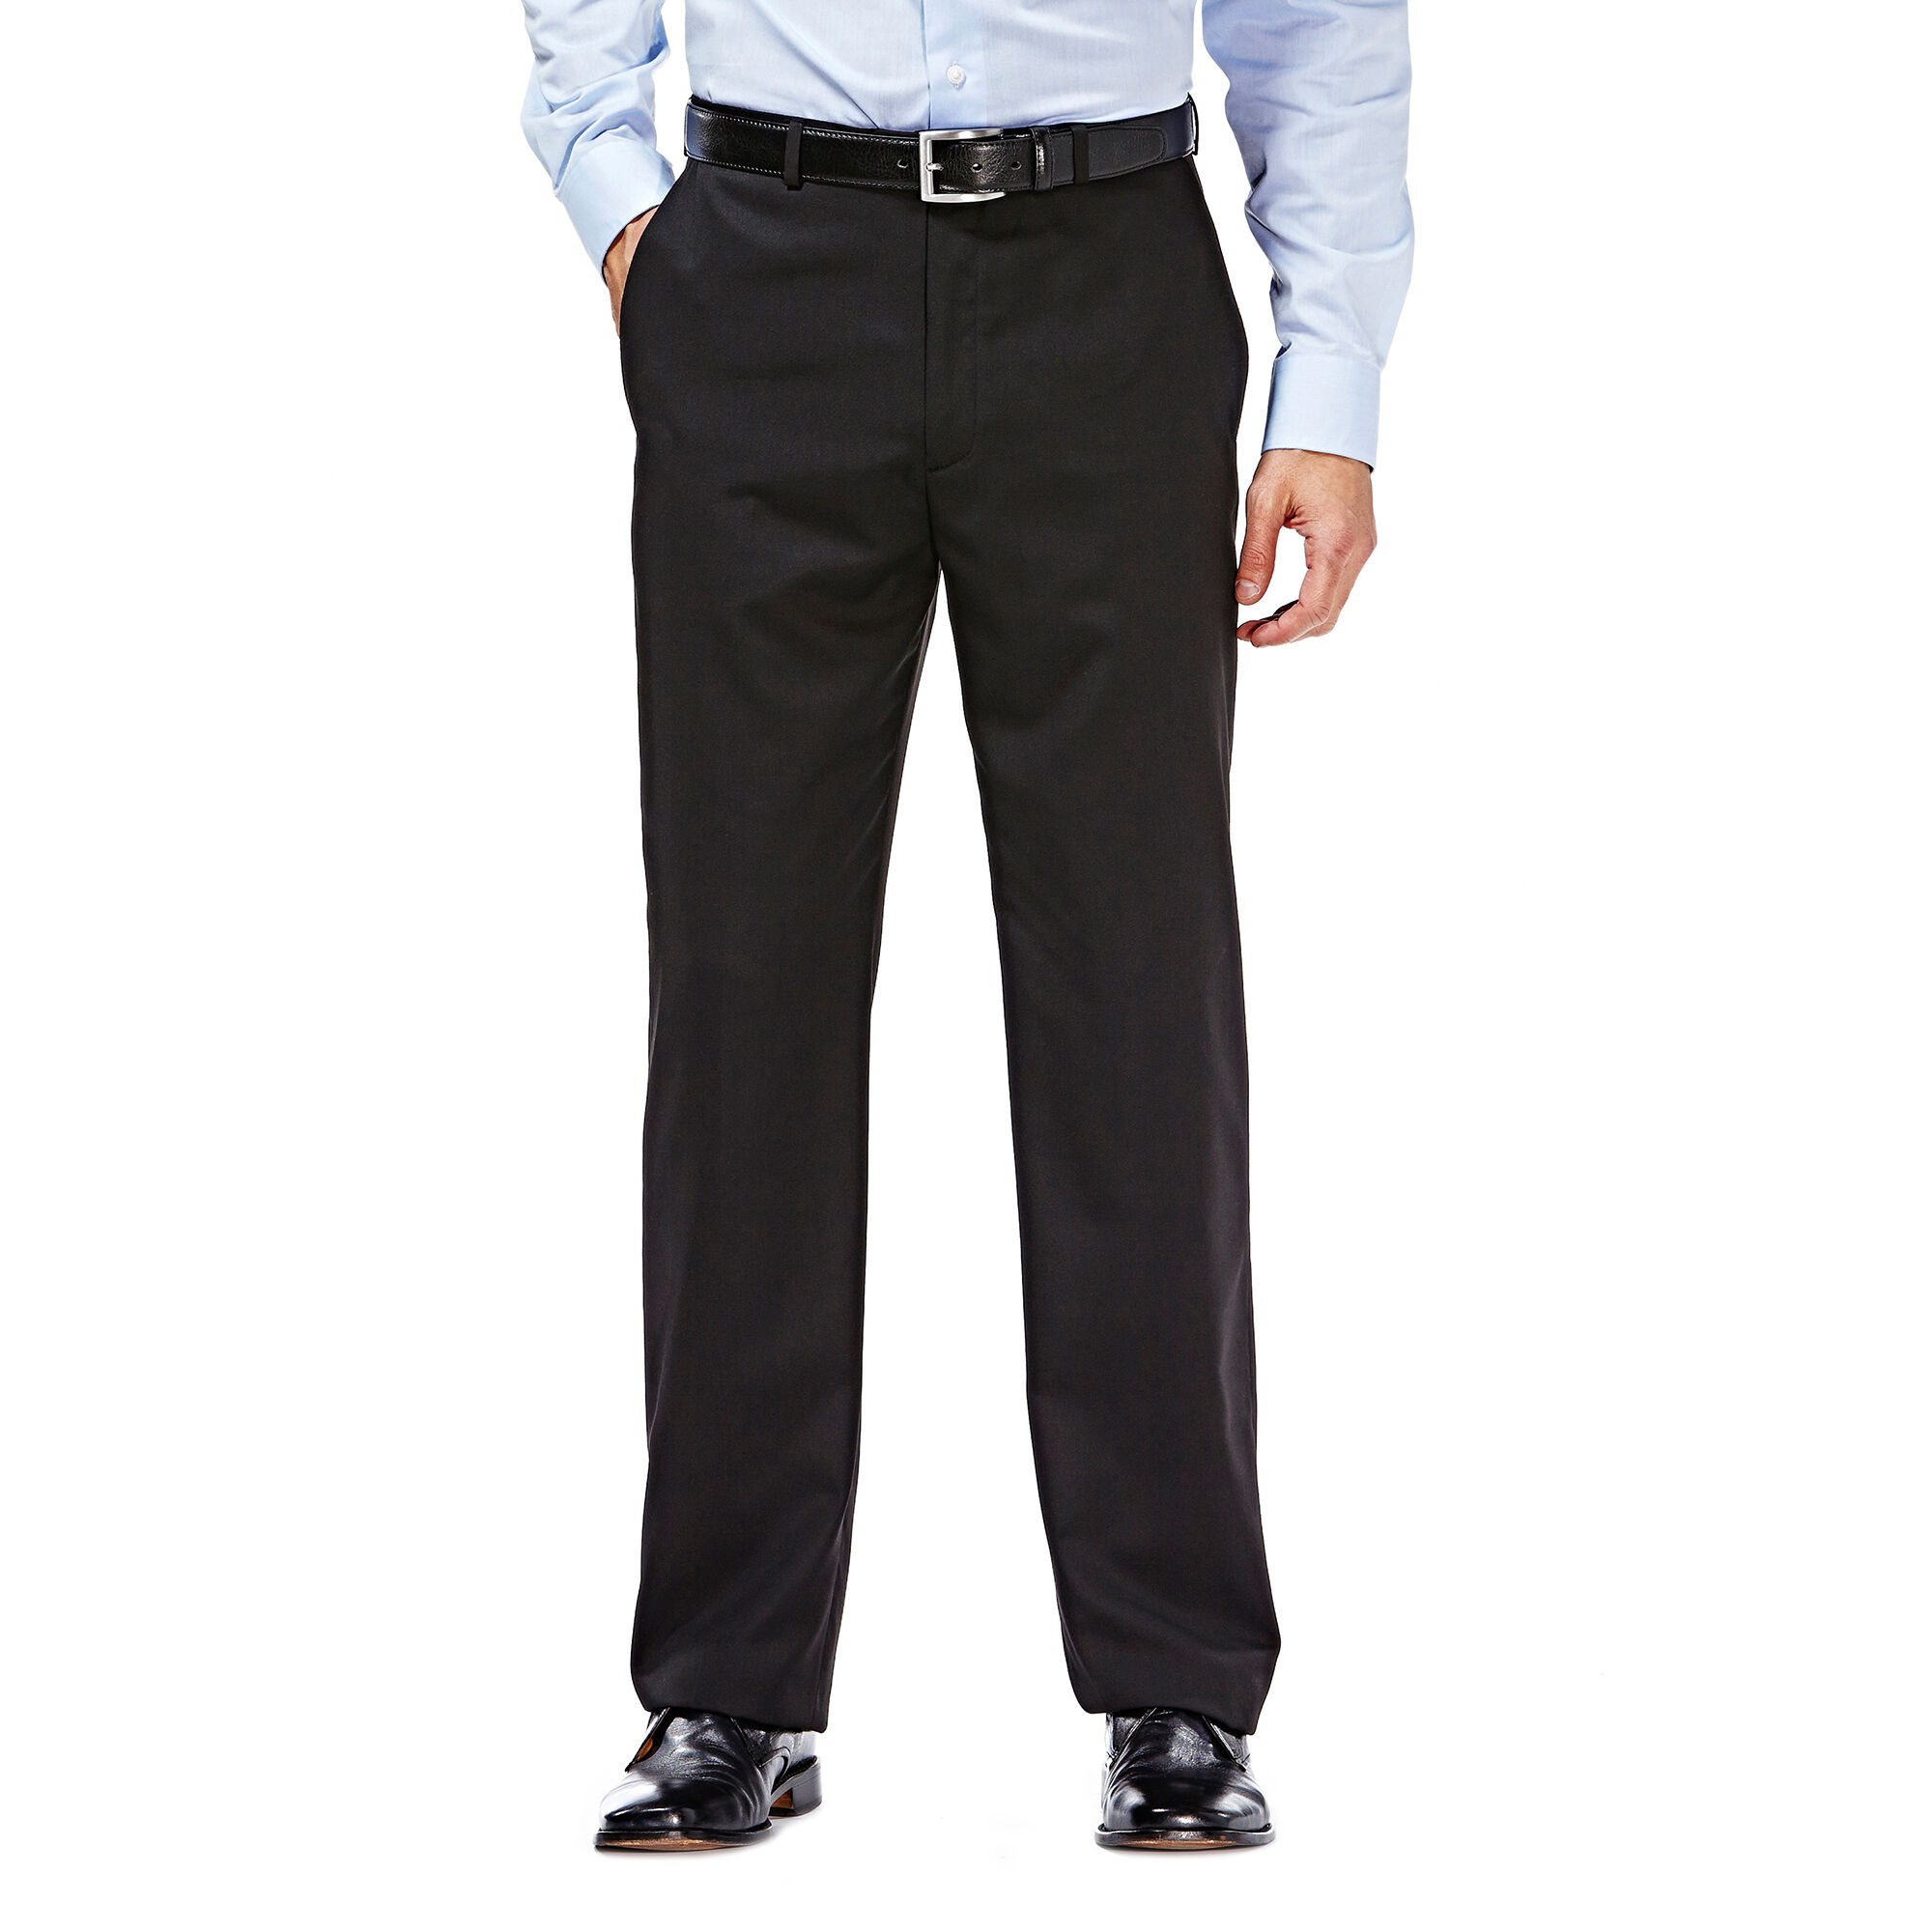 Haggar Wool Blend Twill Suit Pant Black (HY00225 Clothing Suits) photo